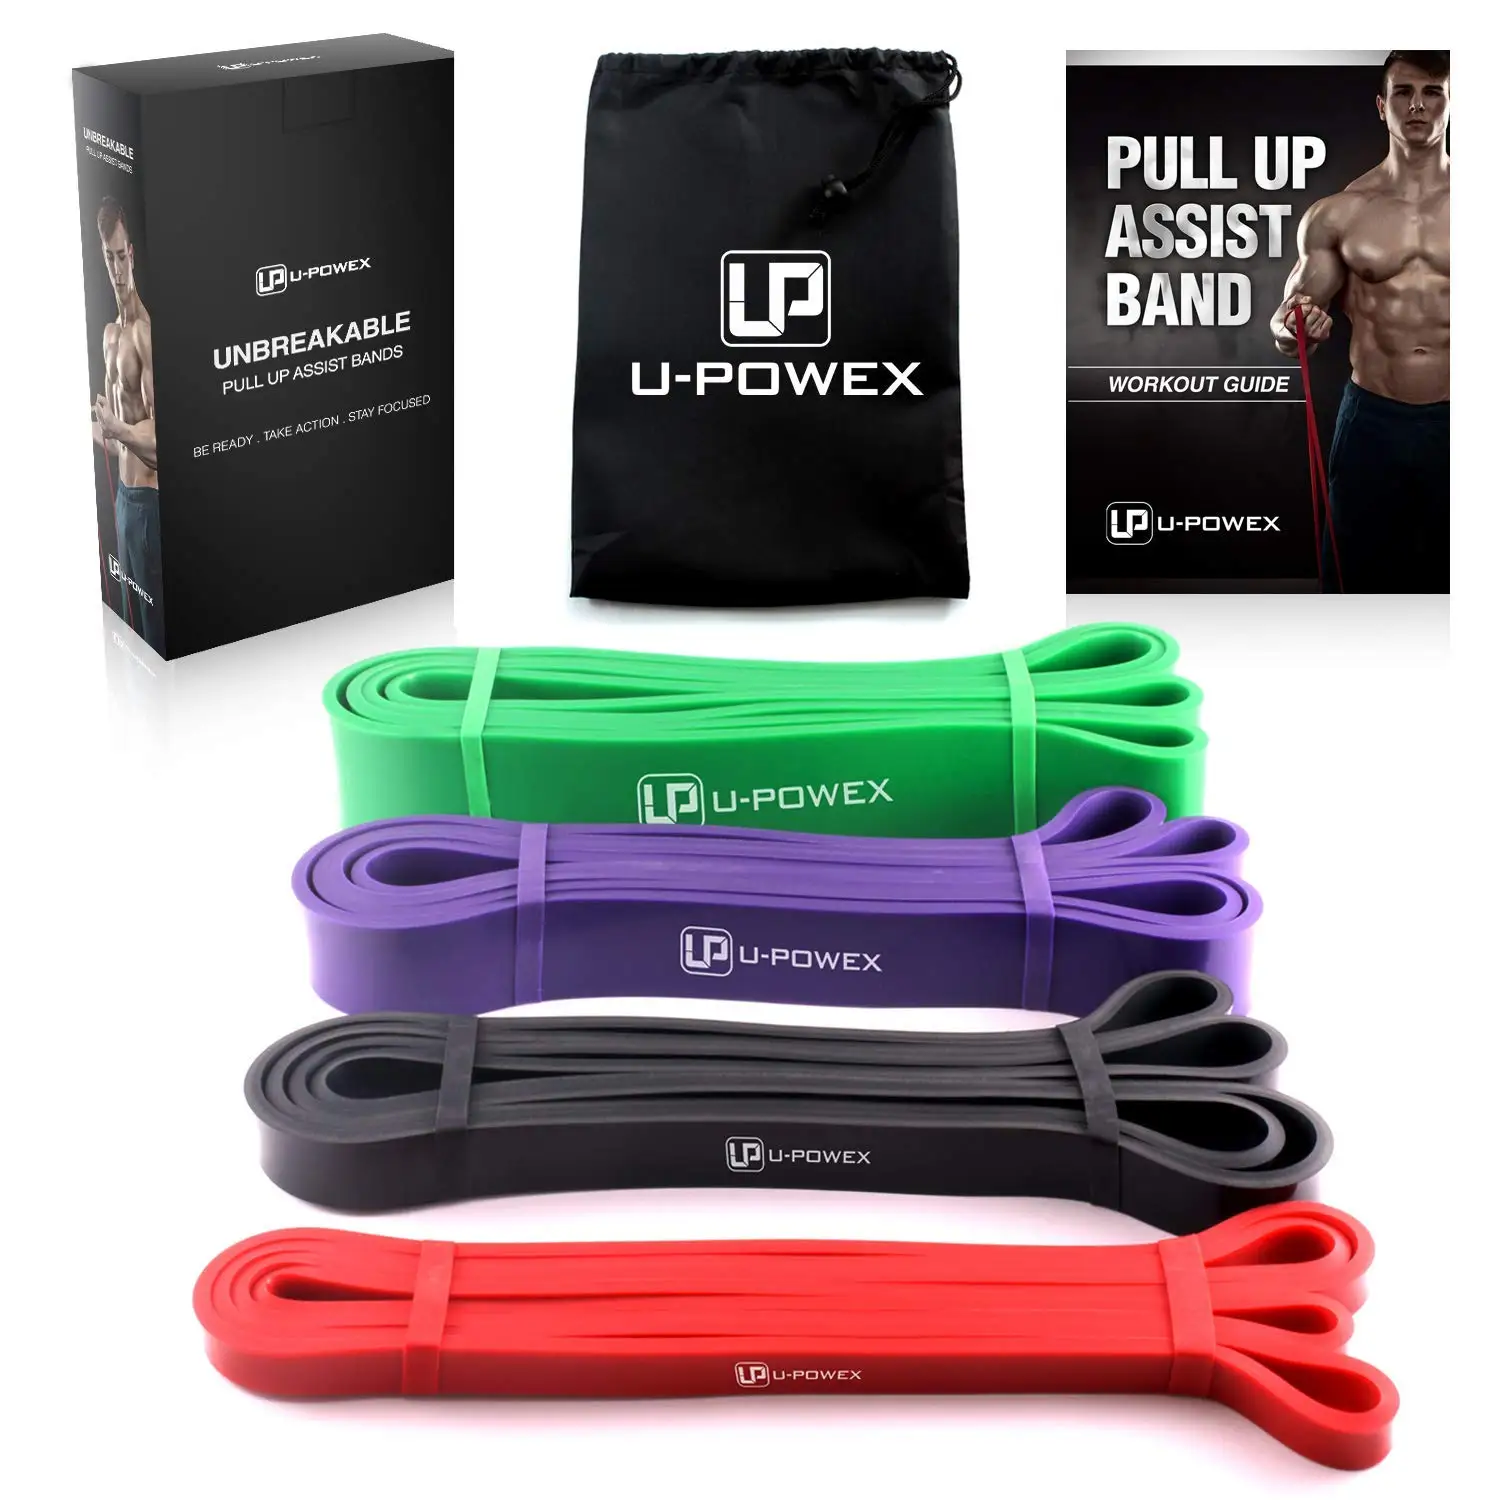 FX FFEXS Premium Pull Up Resistance Bands for Assisted for Pull Up Chin Up Blue 